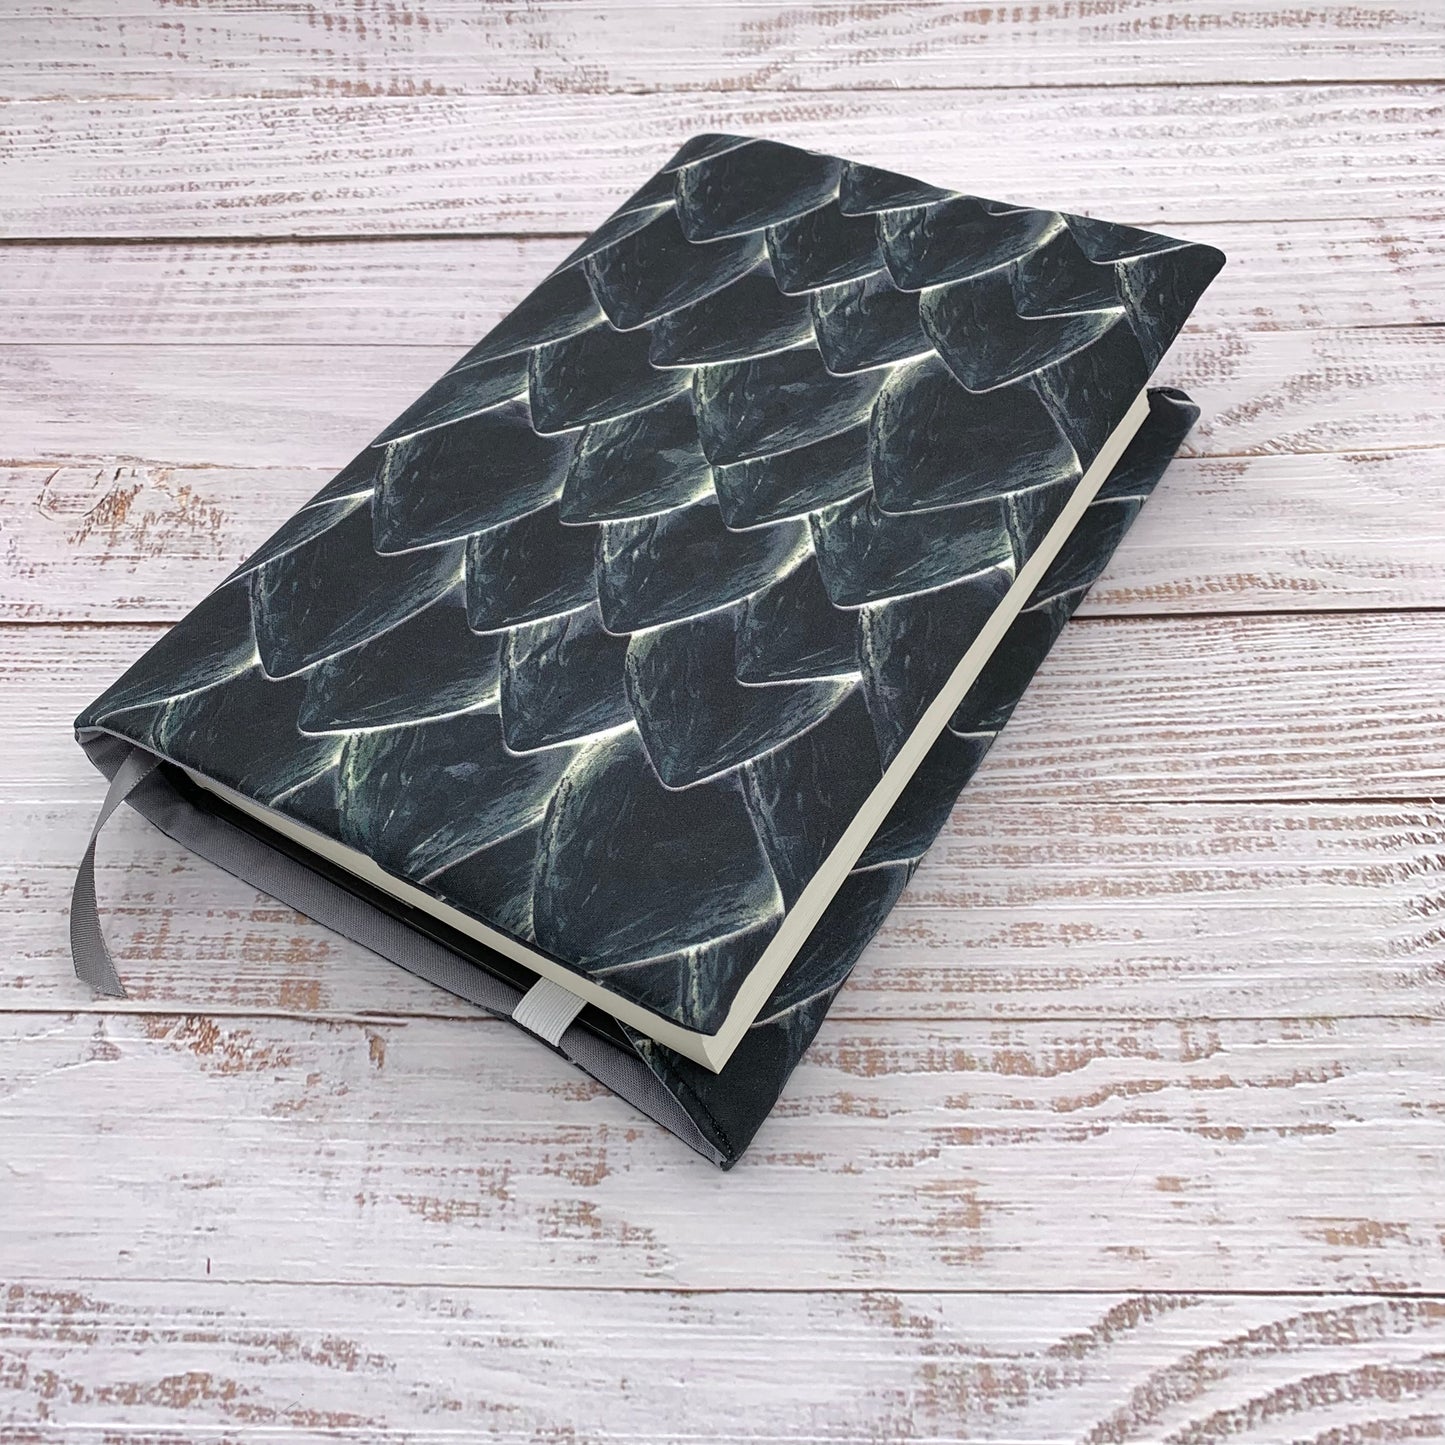 Dragon Scales - Dust Jacket, Book Cover